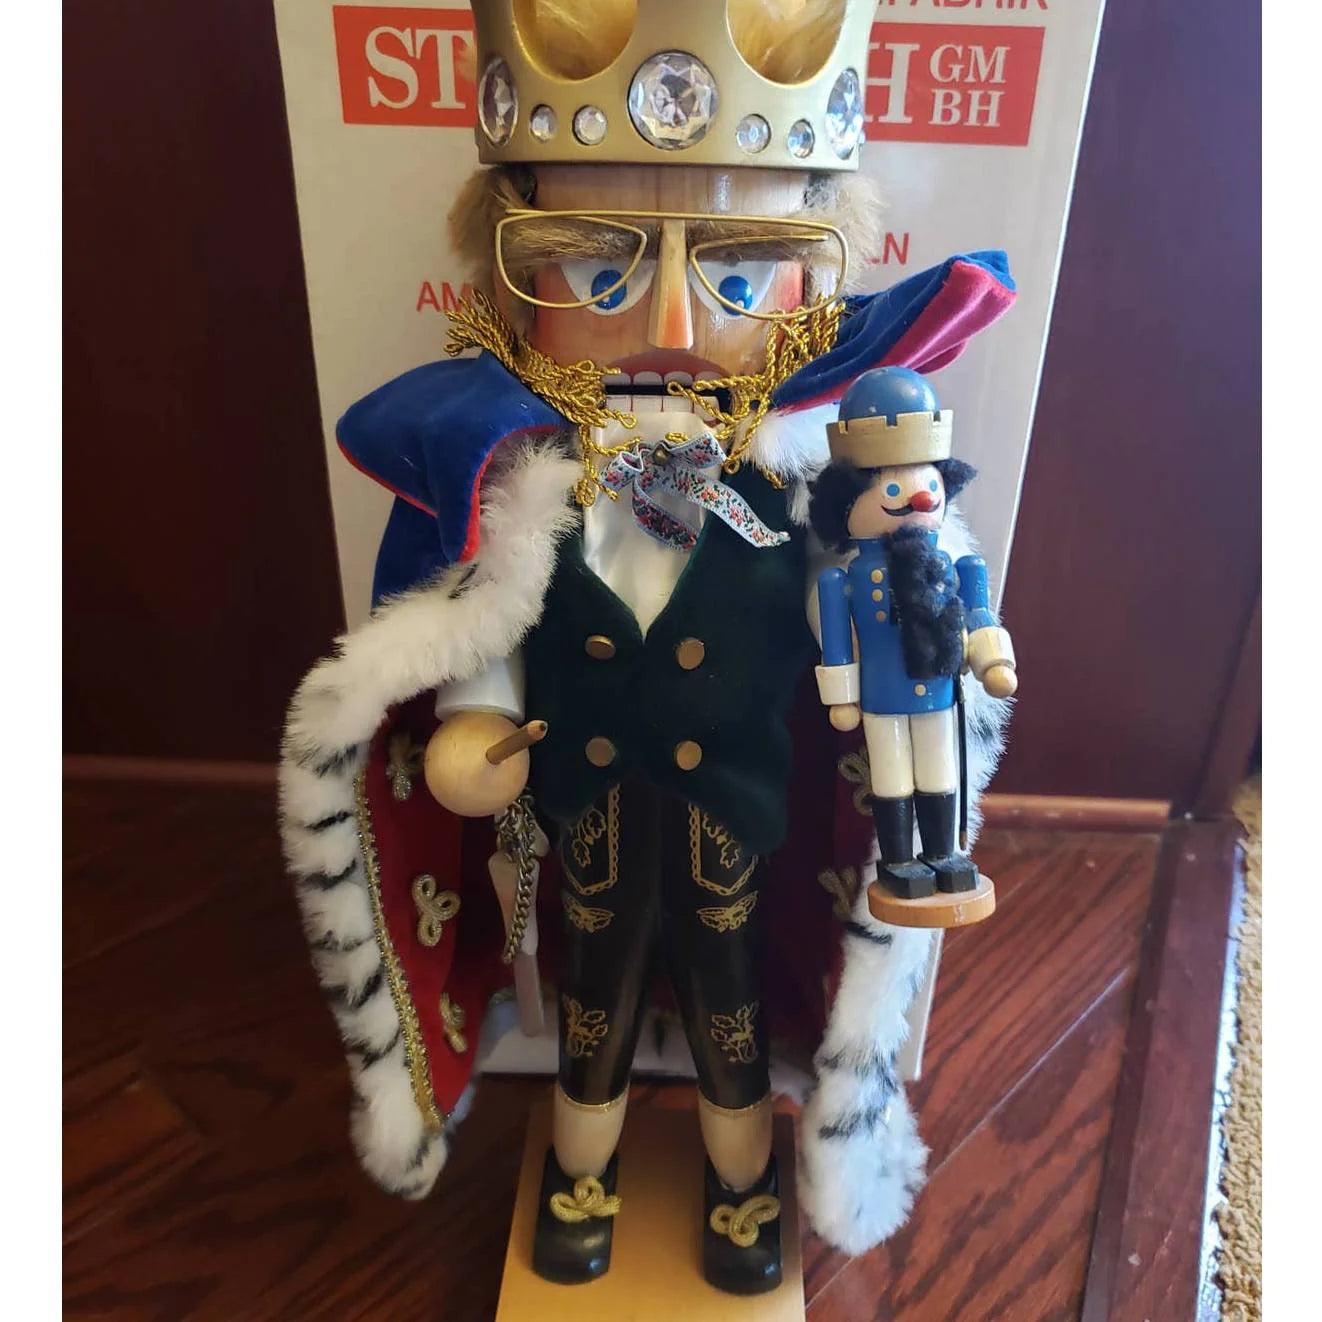 Cracking the Nut on Steinbach: The Story Behind the Iconic Nutcrackers